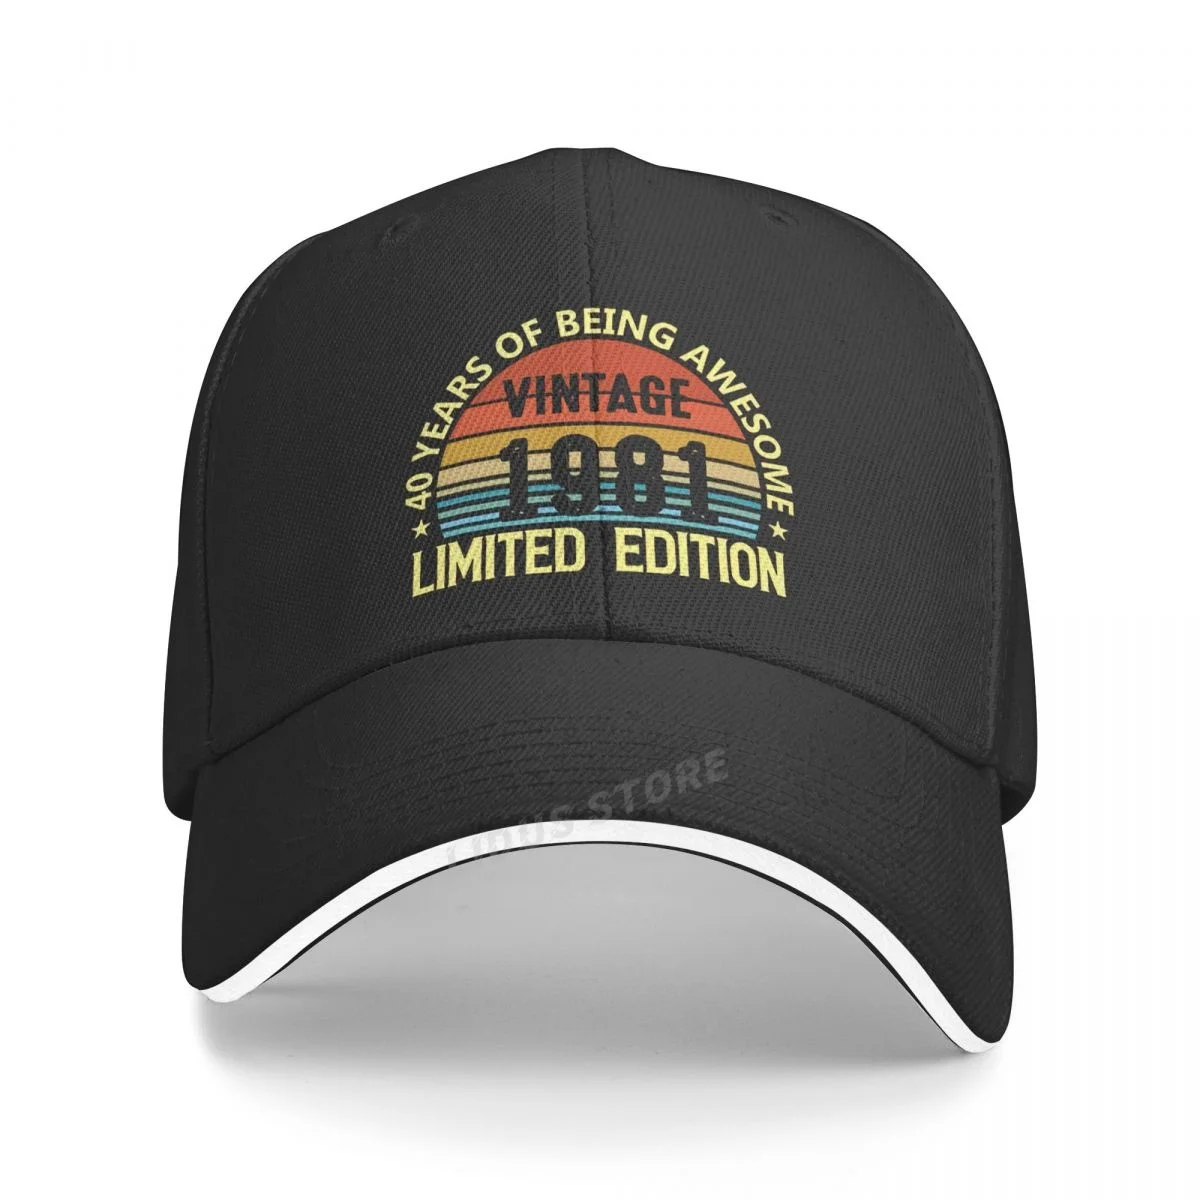 Vintage 1981 40th Birthday Hat Funny Neutral Printing Truck Driver Cap Cowboy Hat Adjustable Skullcap Dad Hat For Men And Women